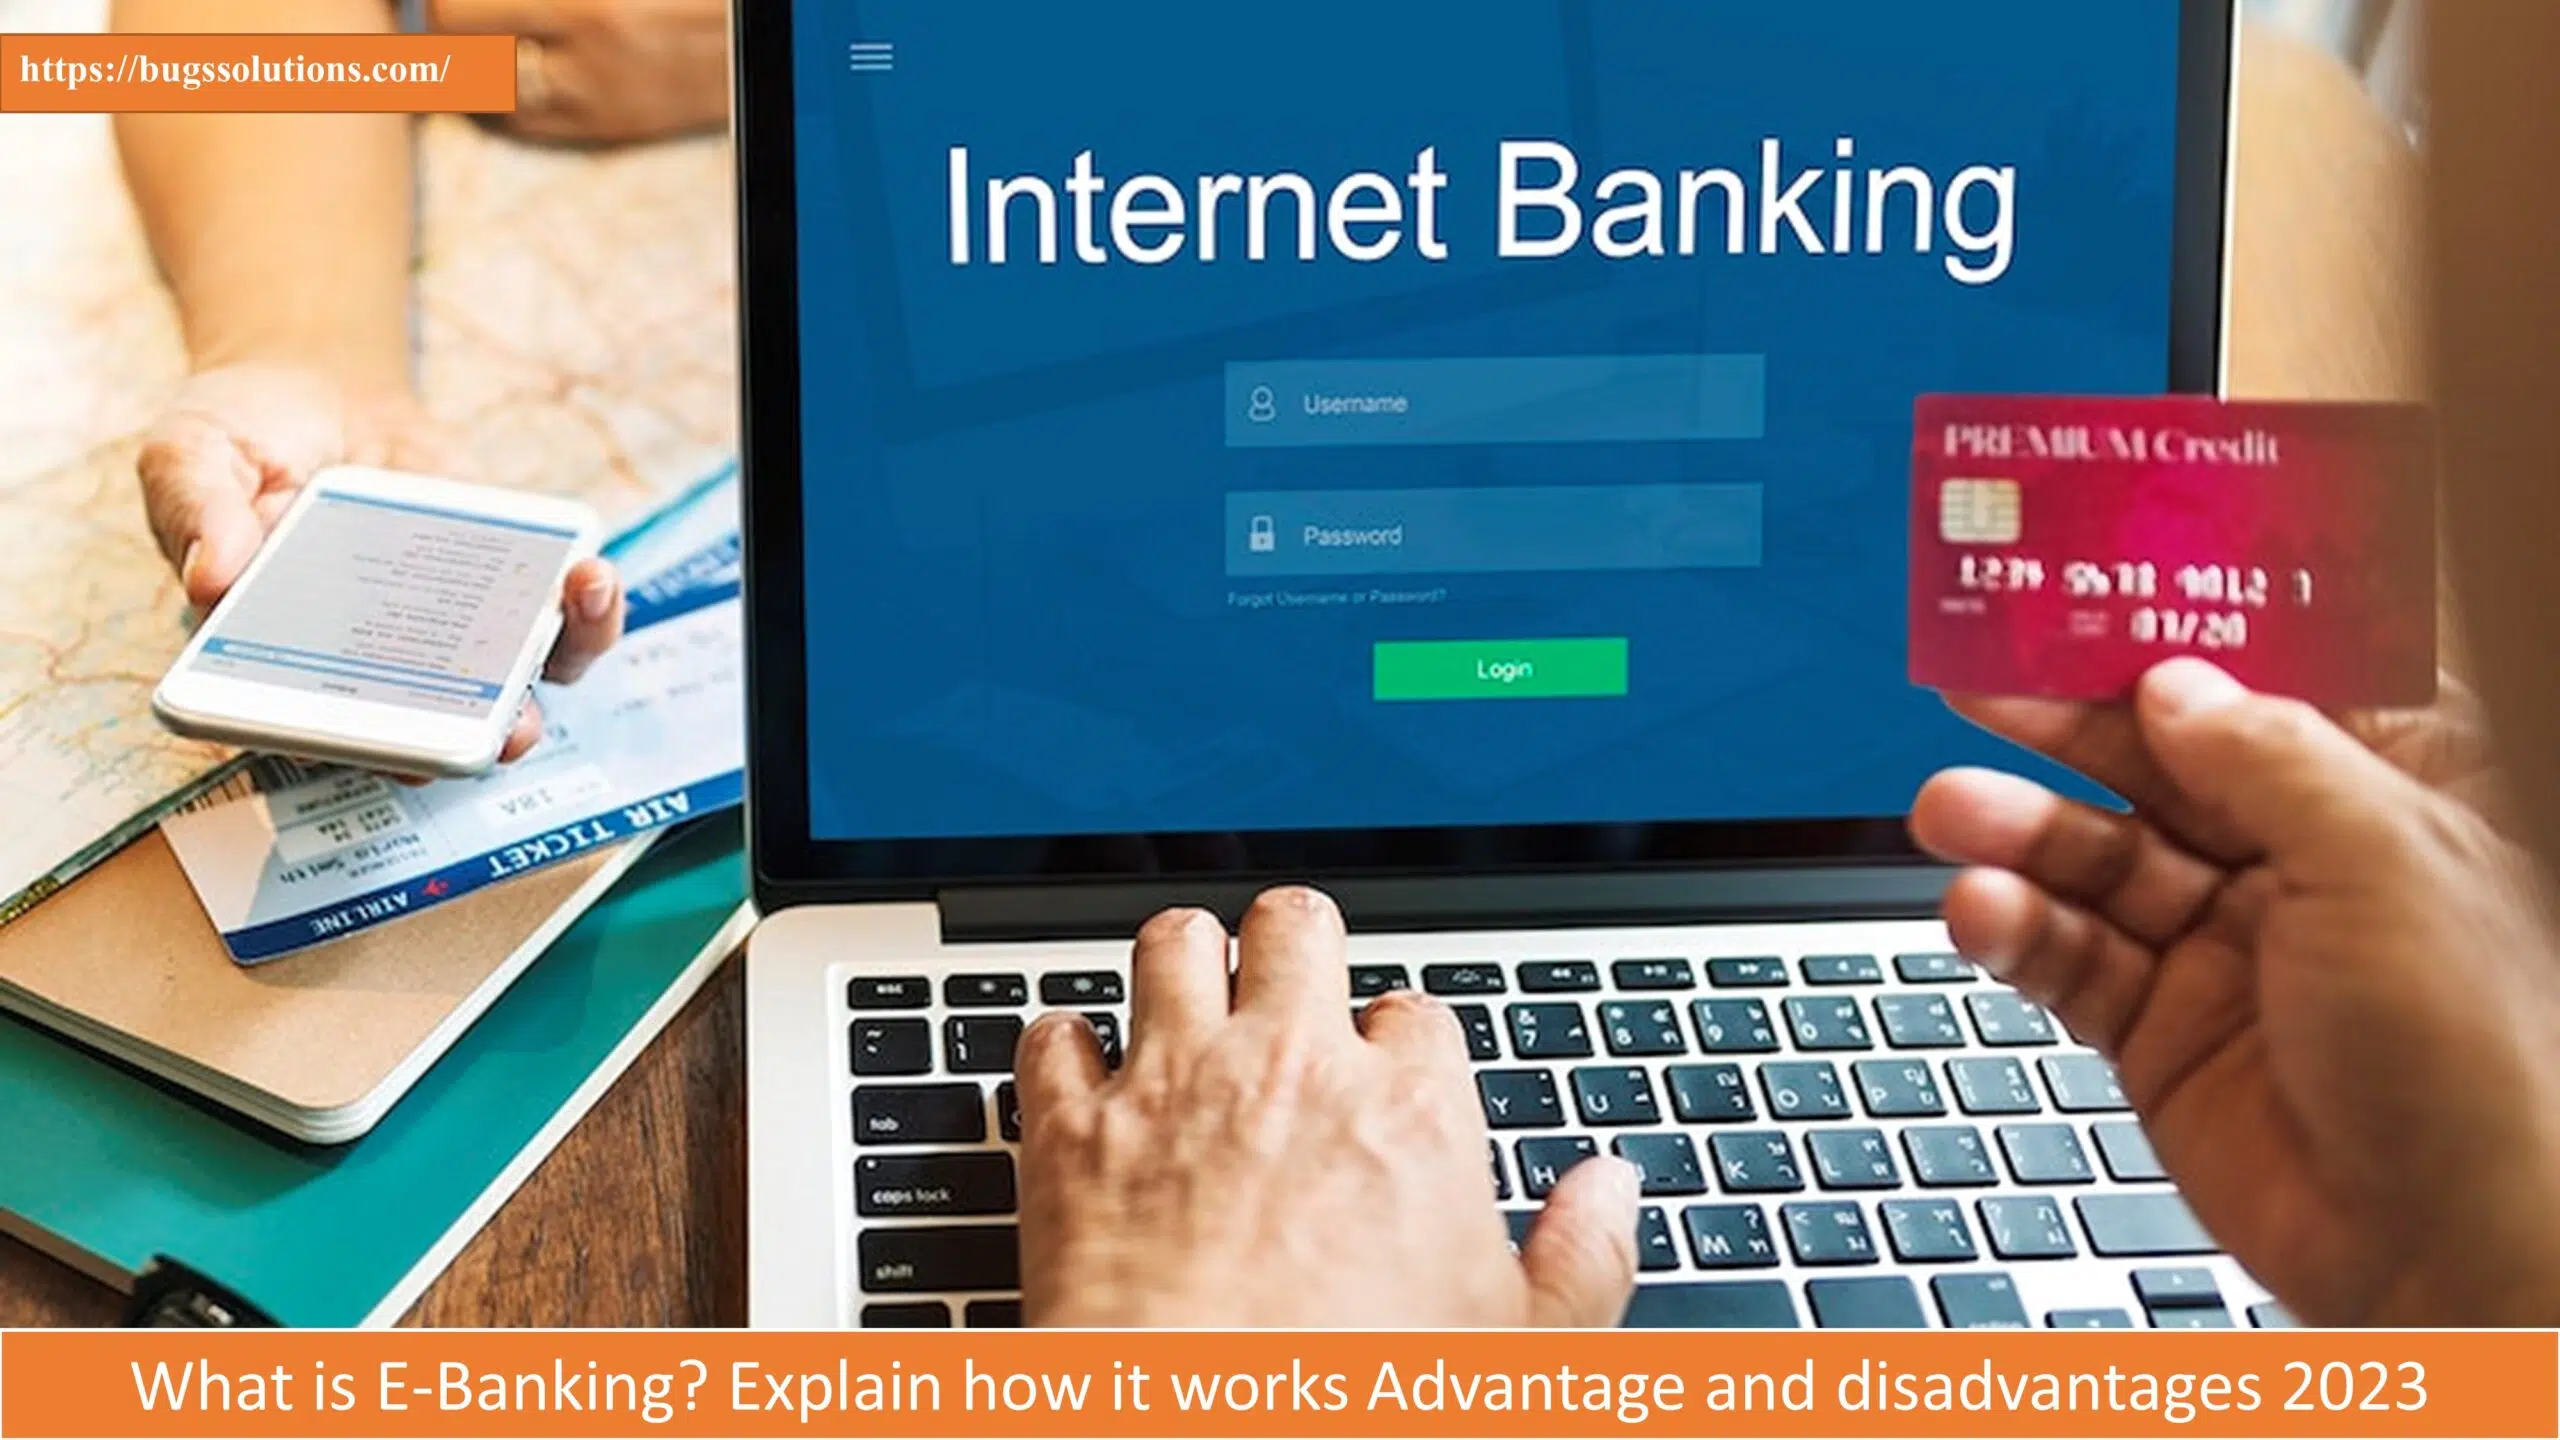 What is E-Banking? Explain how it works Advantage and disadvantages 2023 - Bugs Solutions